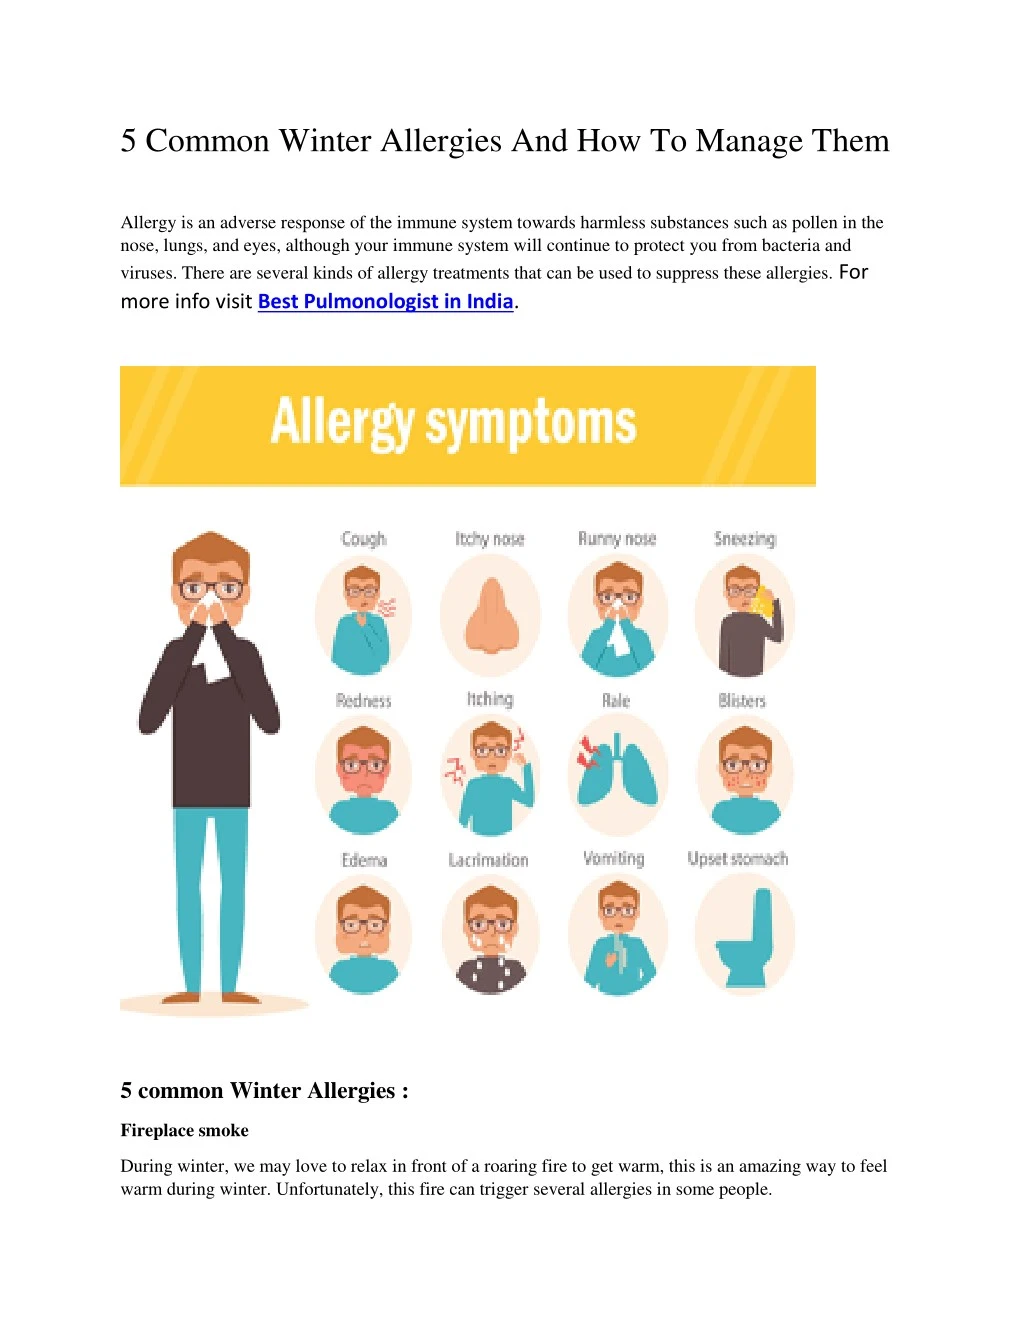 5 common winter allergies and how to manage them